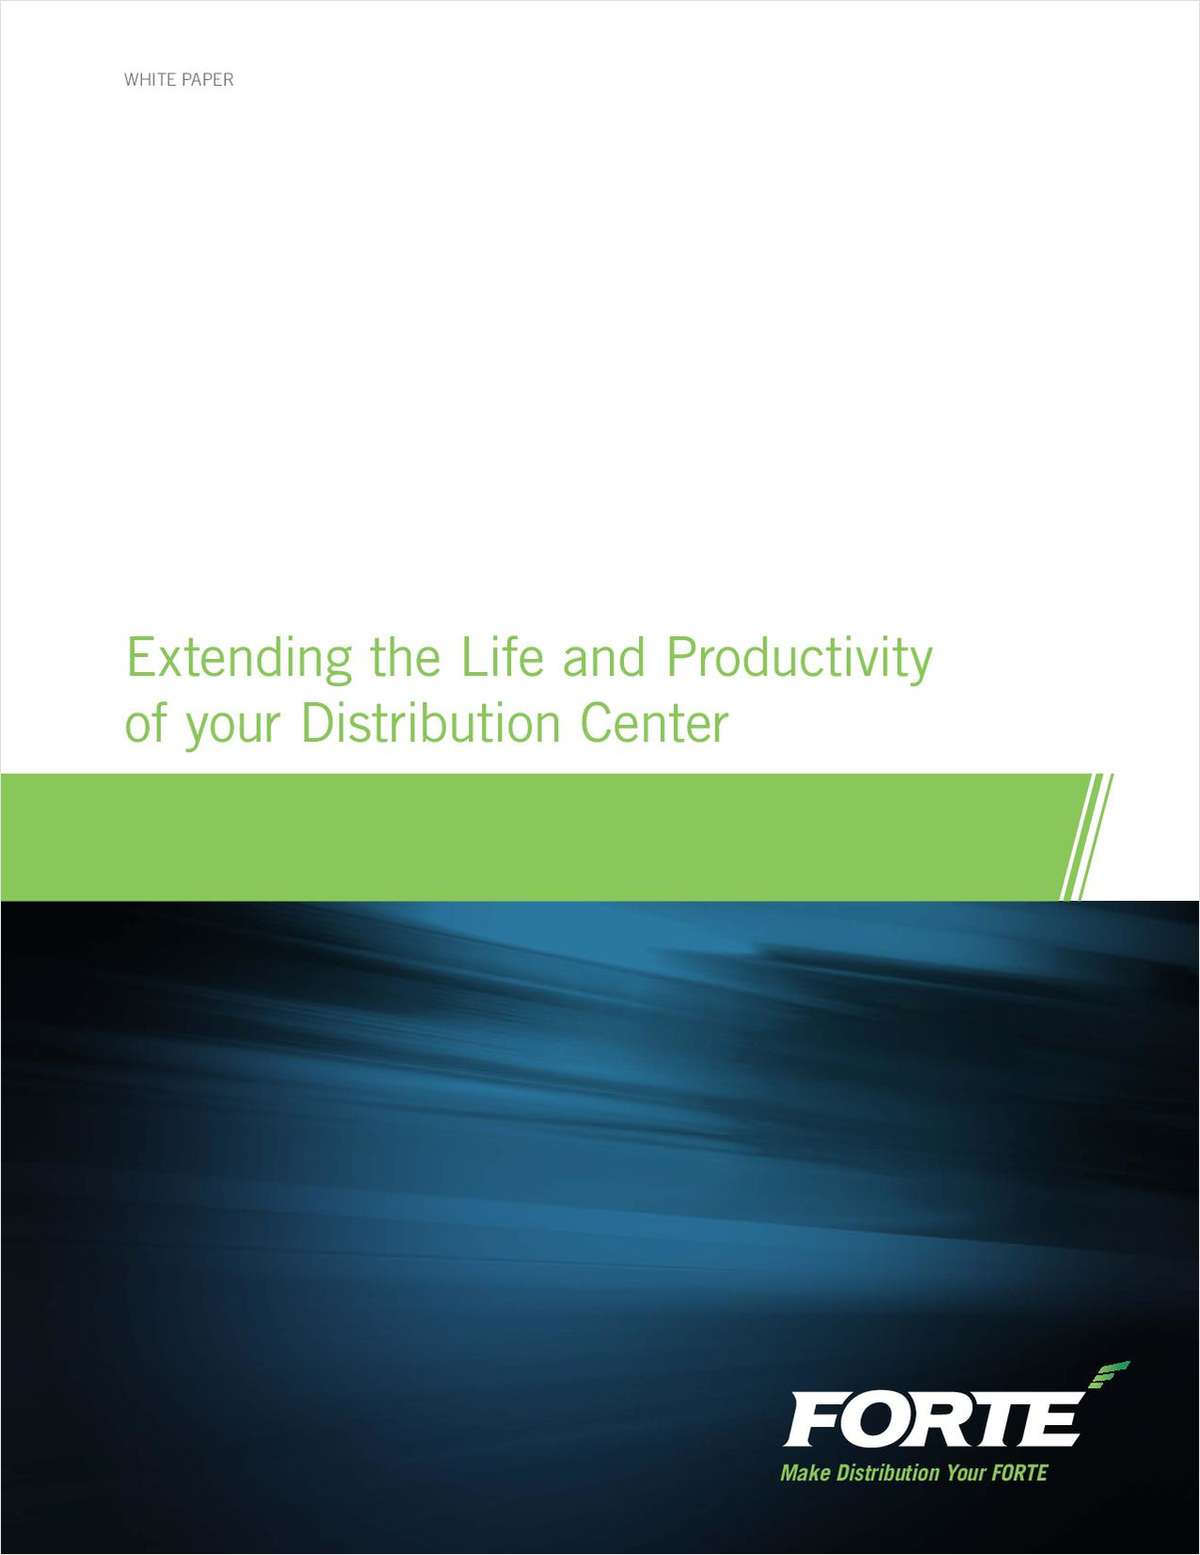 Extending the Life and Productivity of your Distribution Center